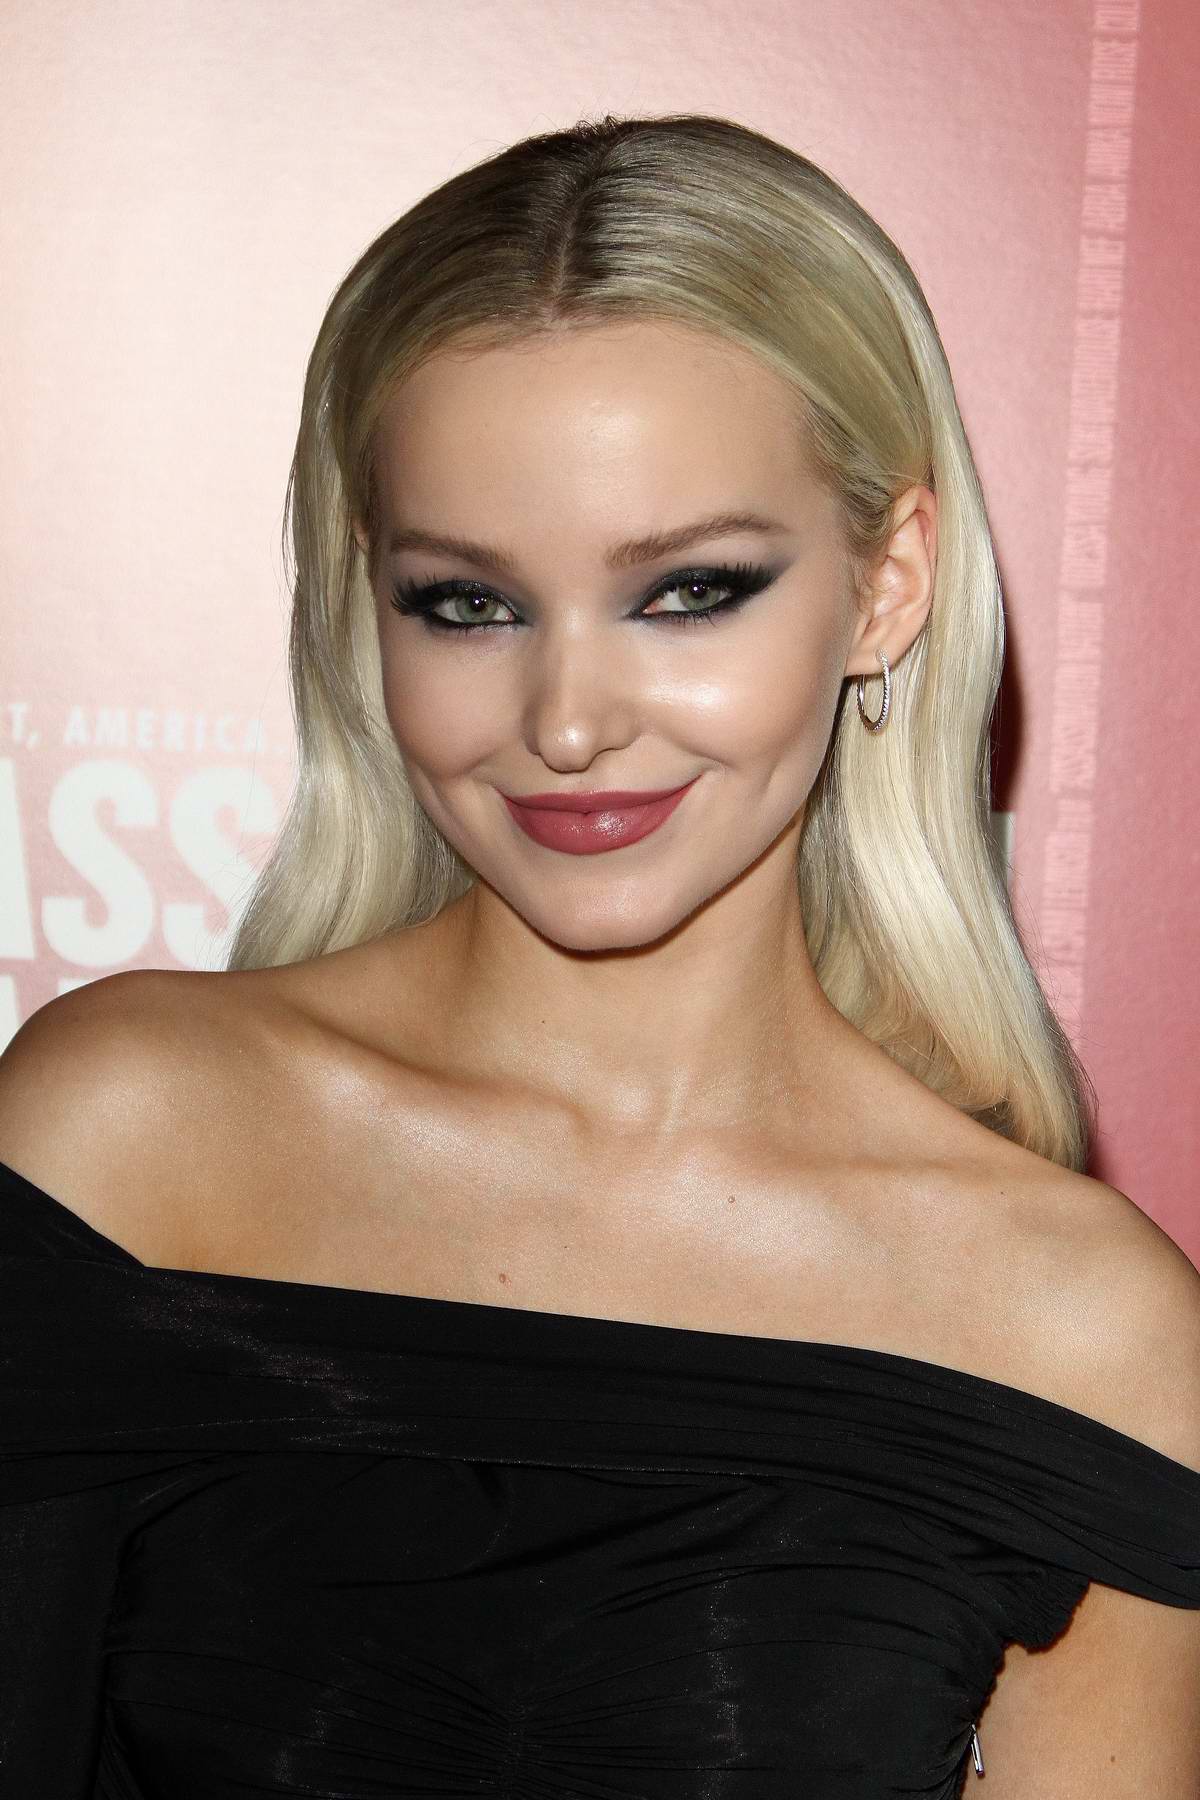 dove cameron attends 'assassination nation' film premiere at arclight